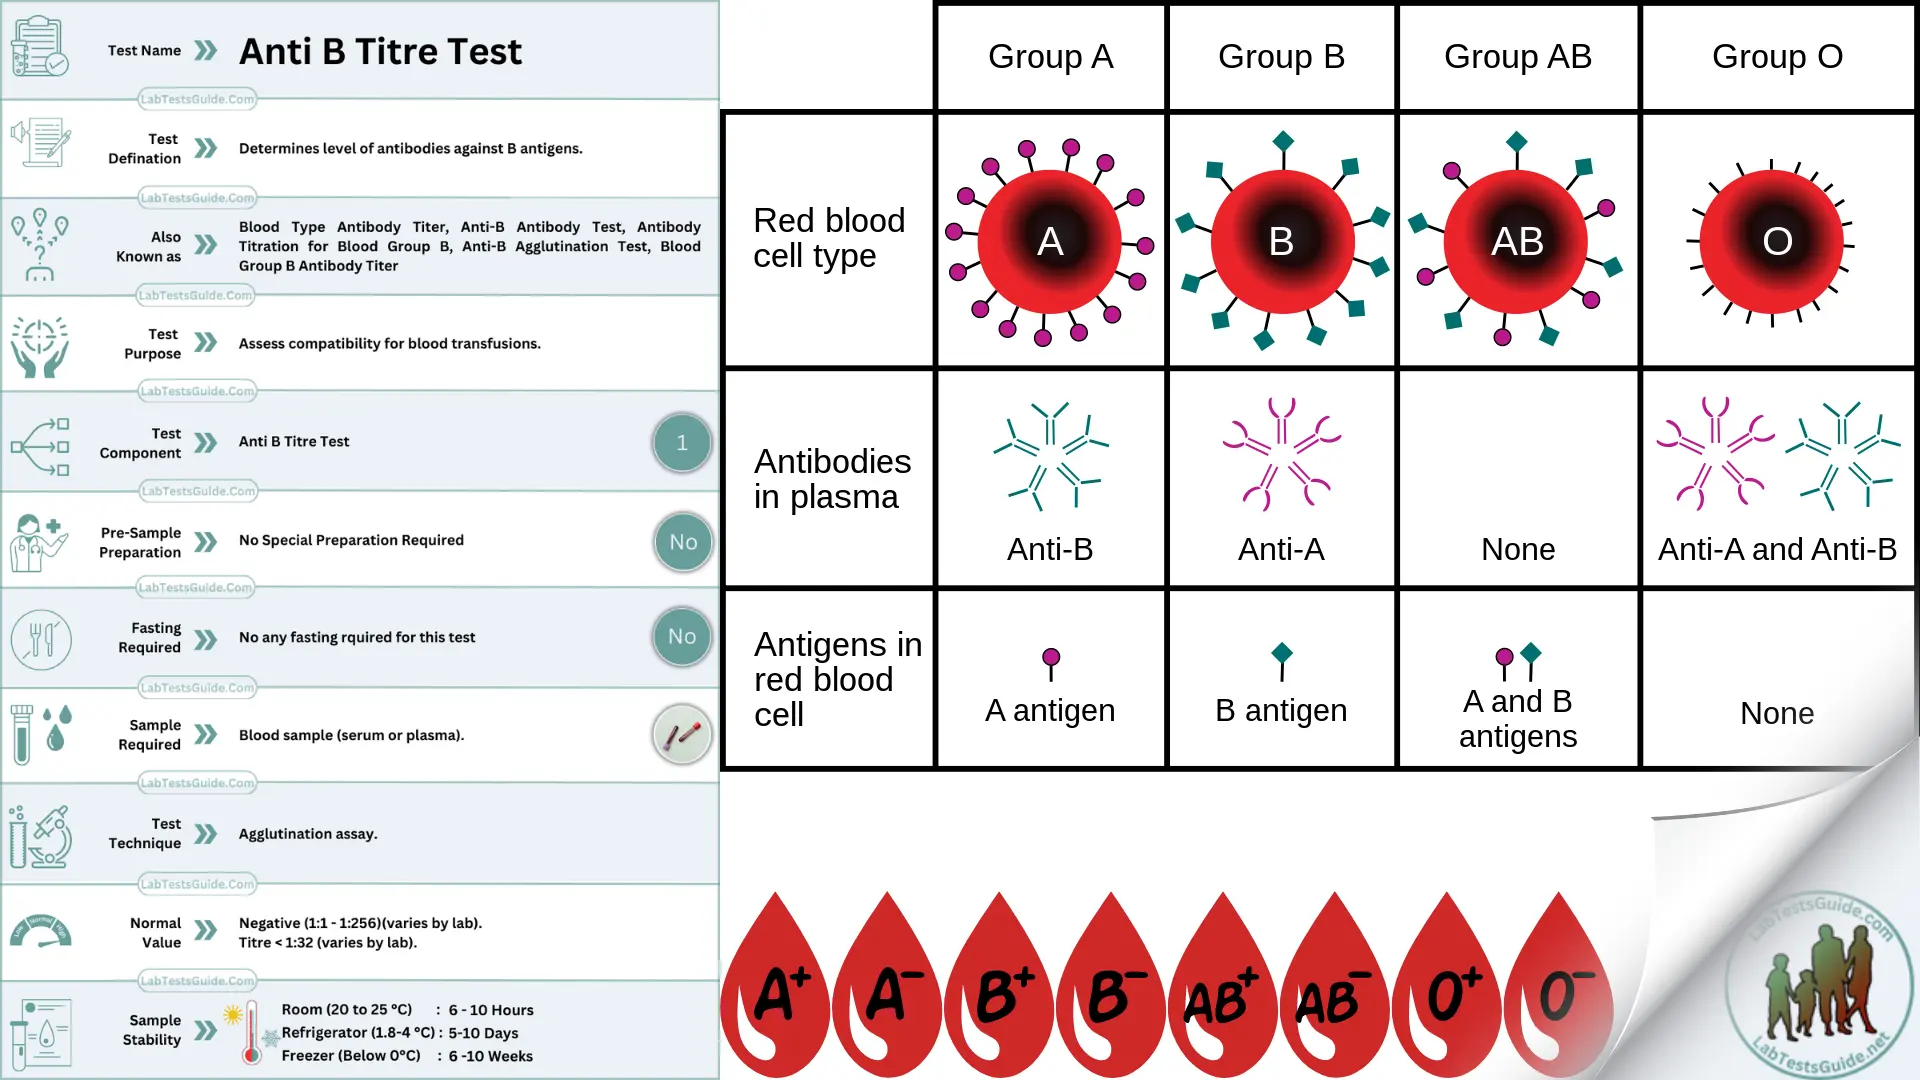 Anti B Titre Test For Blood Transfusions